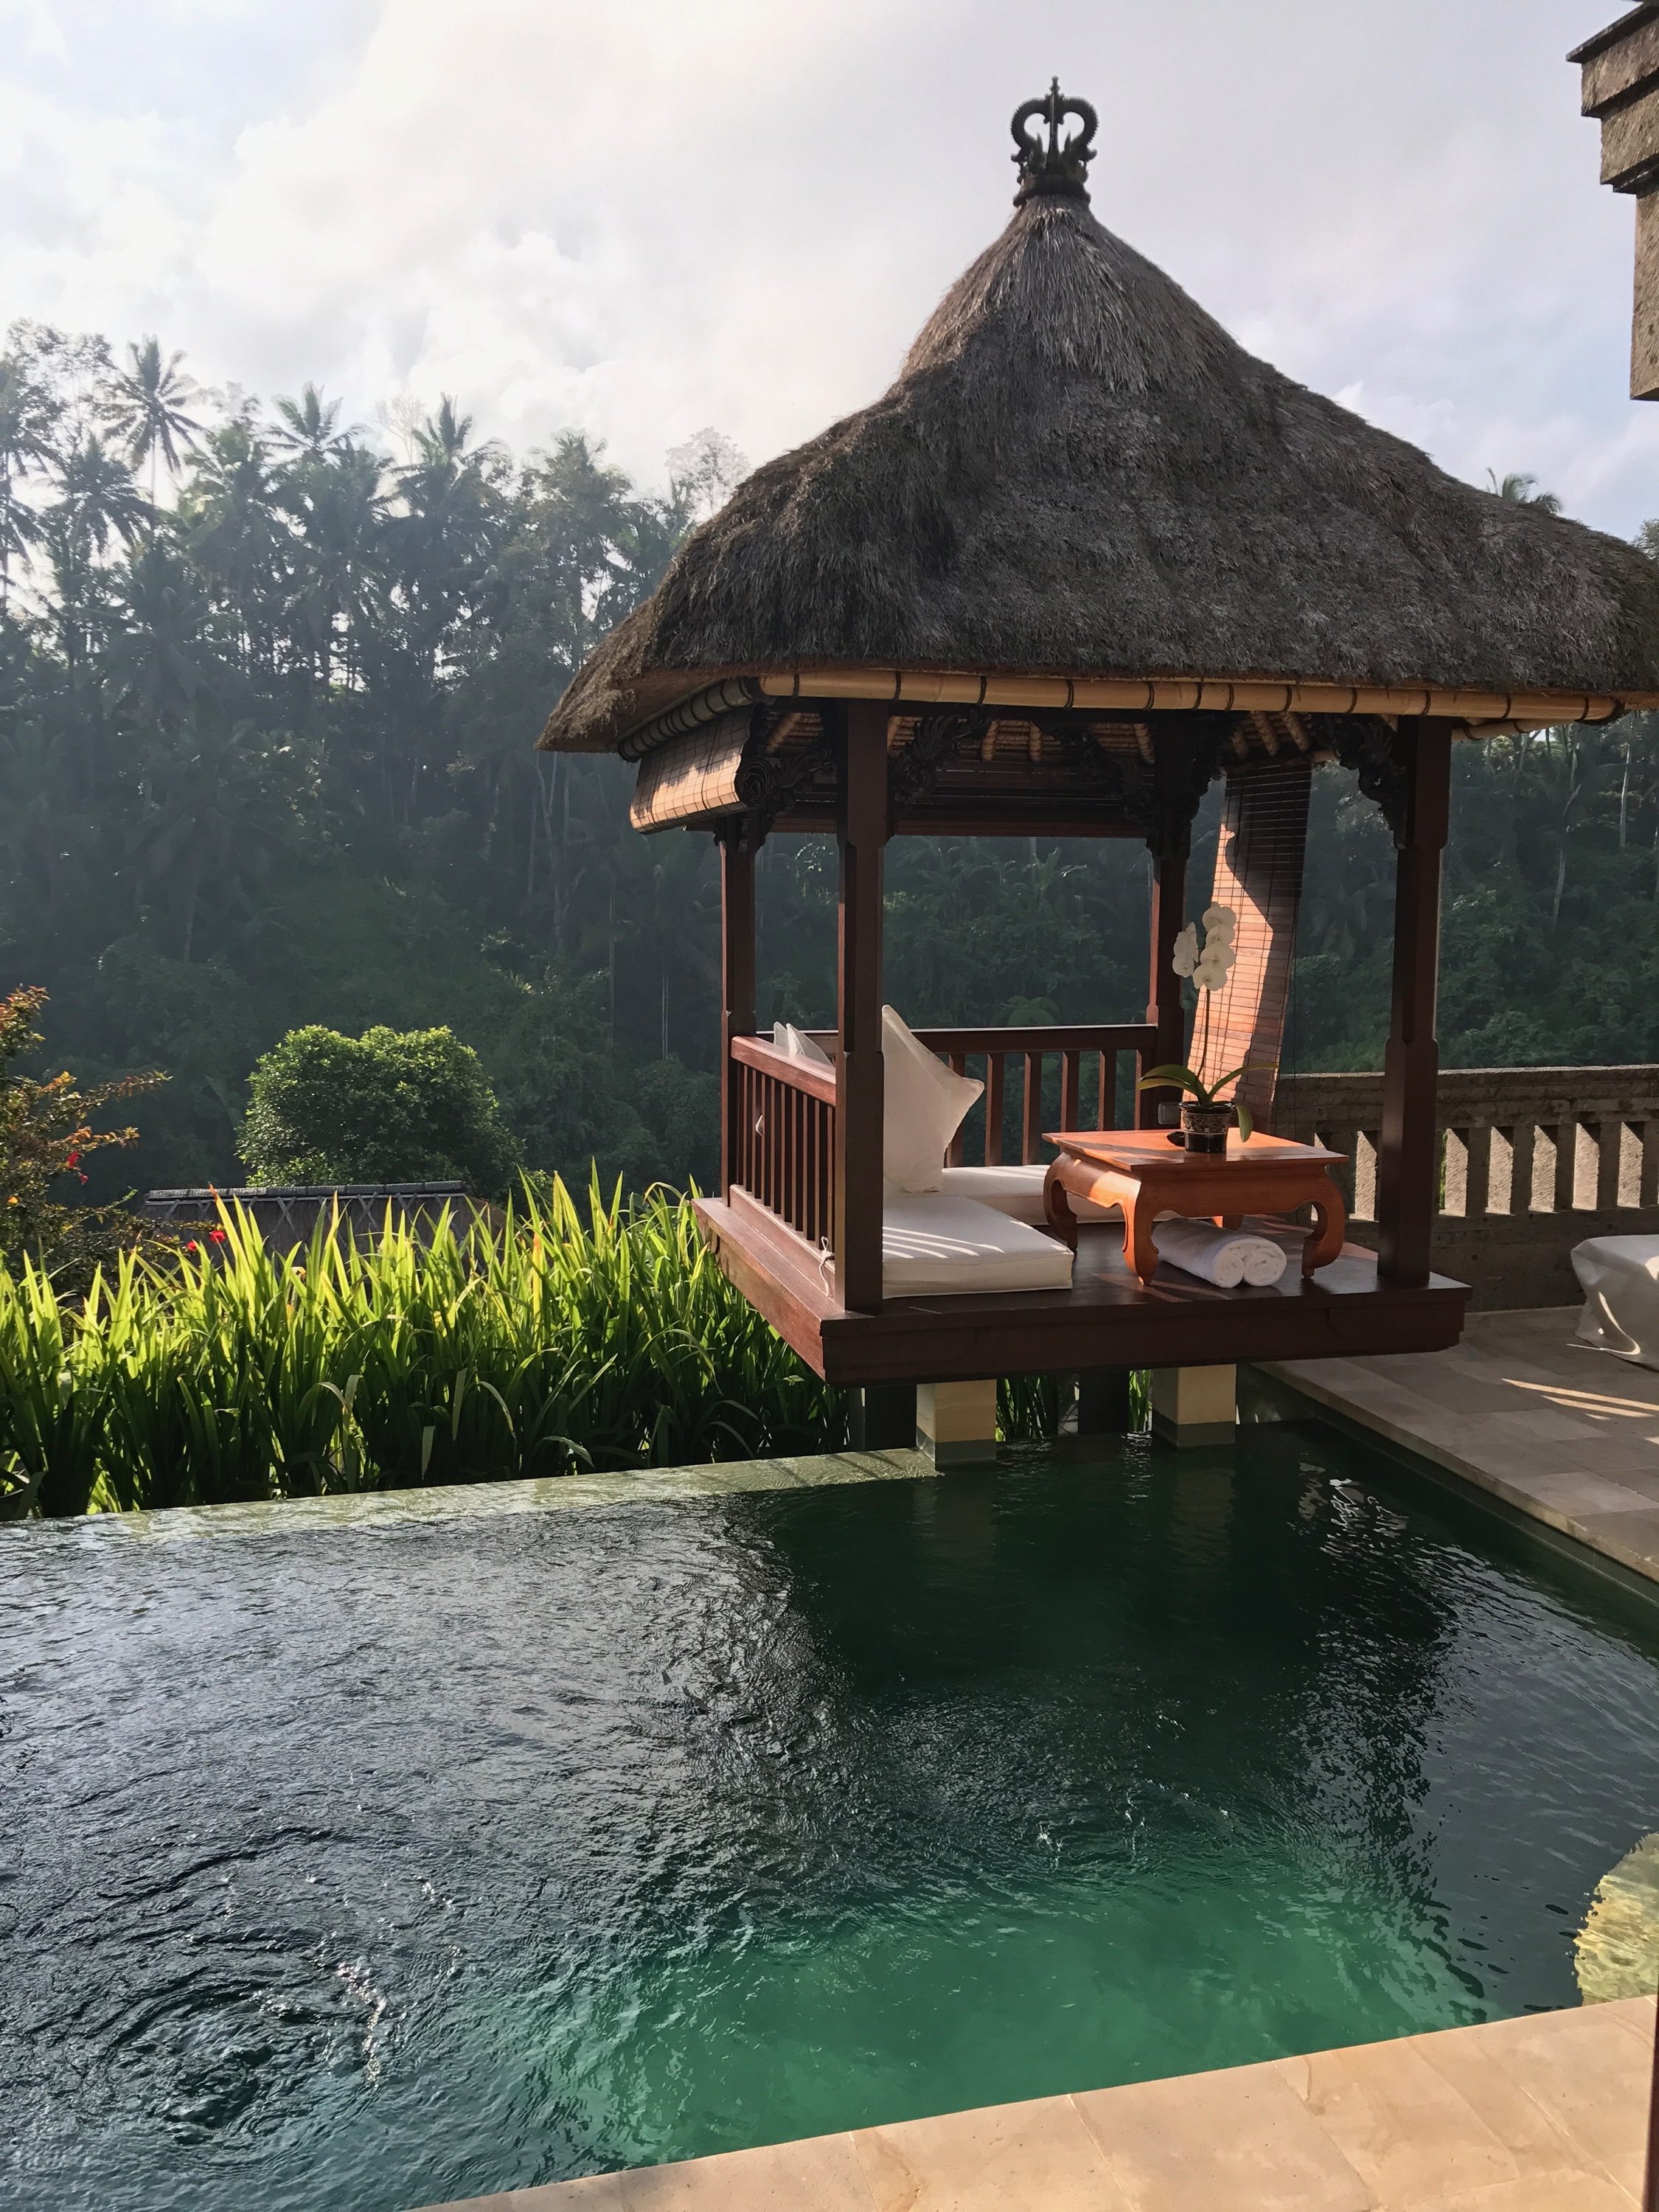 Our Stay At Viceroy Bali - Ubud, Bali, Indonesia - The Viceroy Bali, Luxury Hotel - The Viceroy Bali - Bali Ubud Hotels - The Viceroy Bali Hotel - Hotel Viceroy Bali #ubud #bali #travel #luxury #luxuryhotel